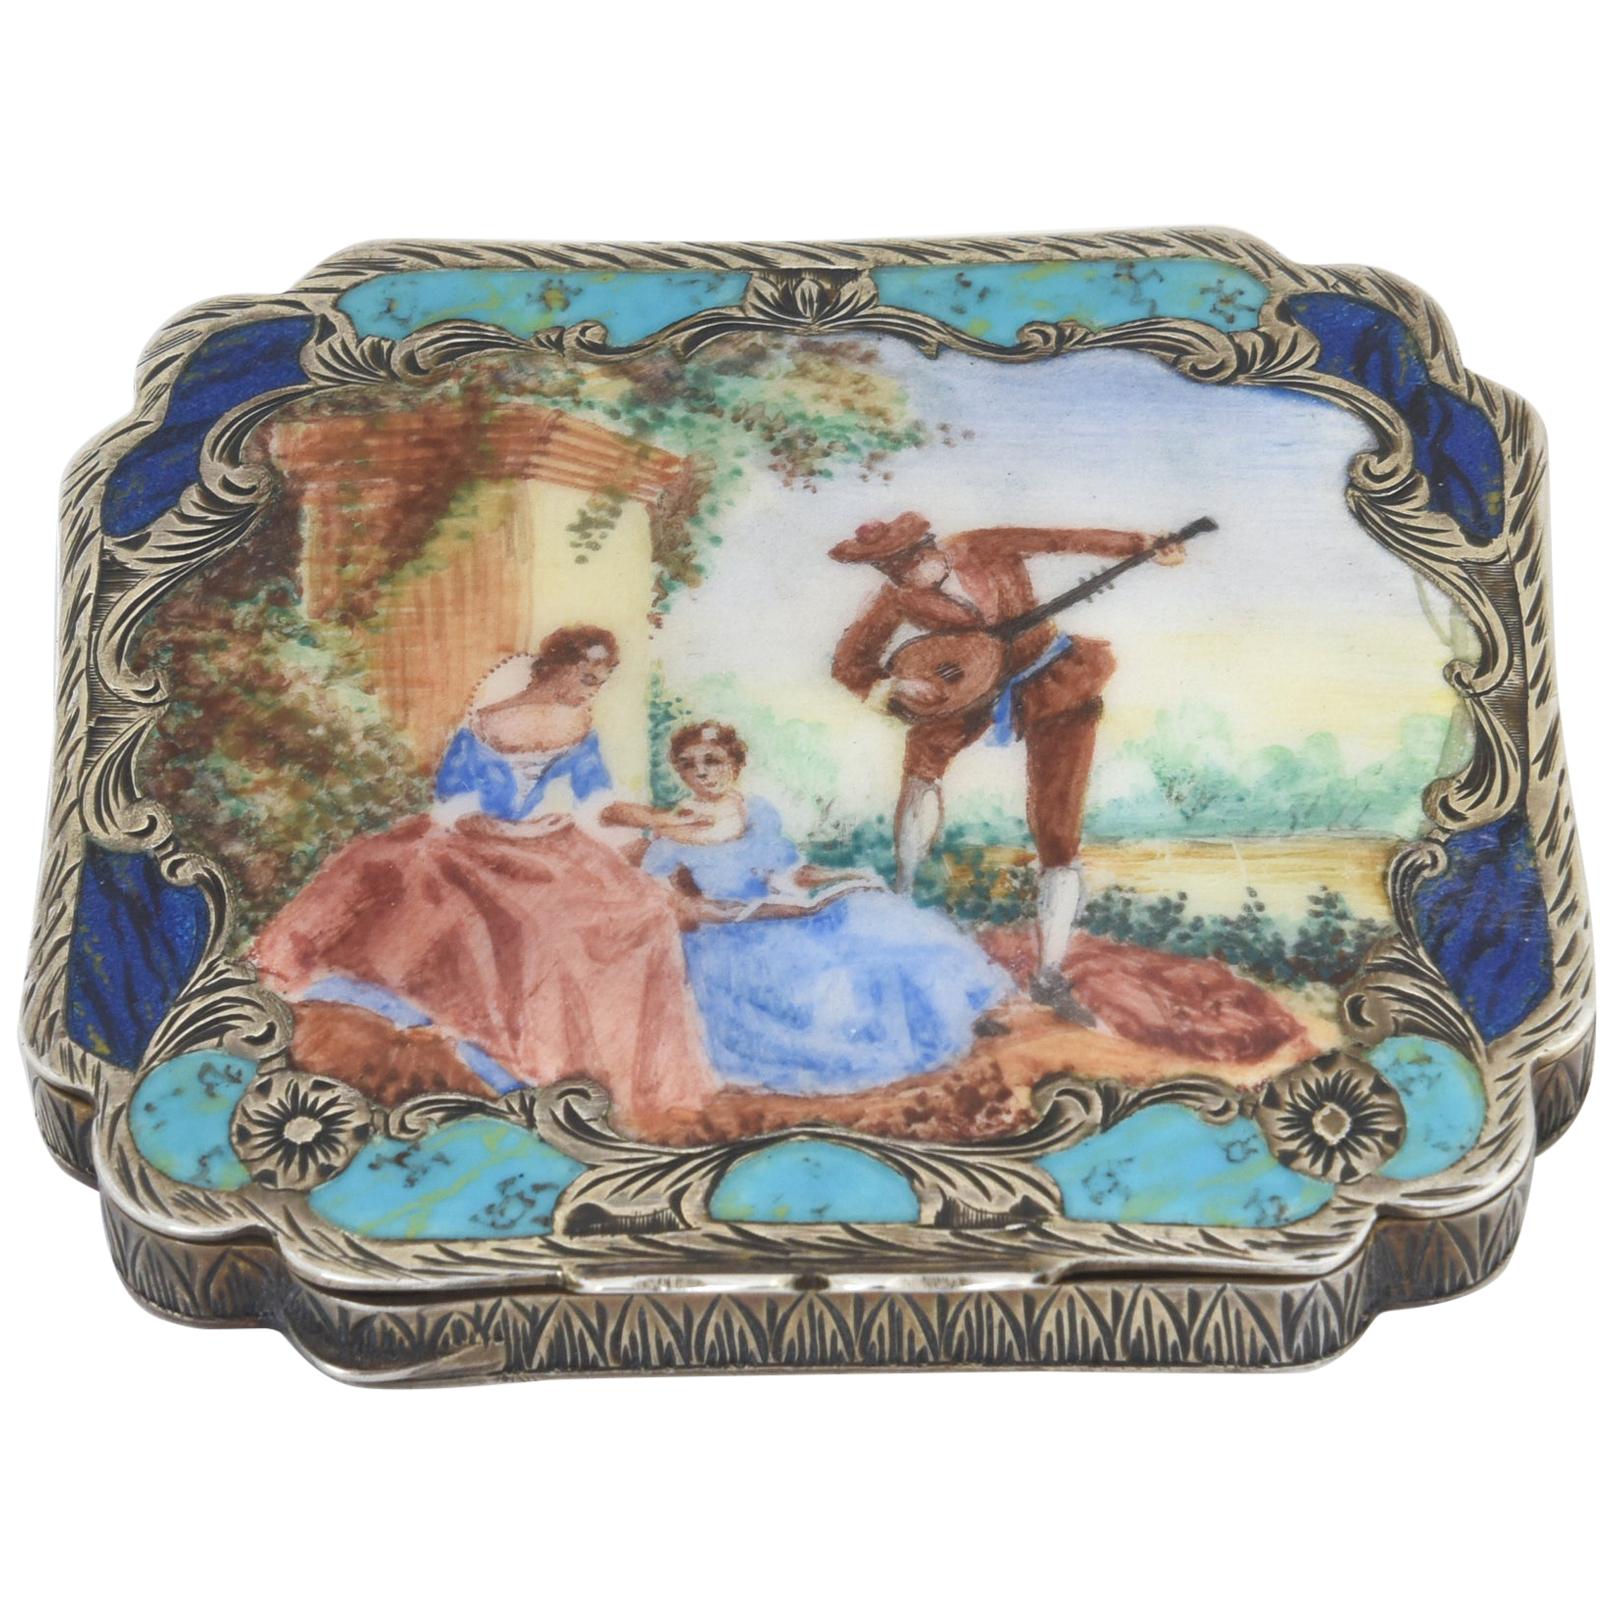 Early 20th Century Antique Silver Enamel Figures in Garden Scene Compact For Sale